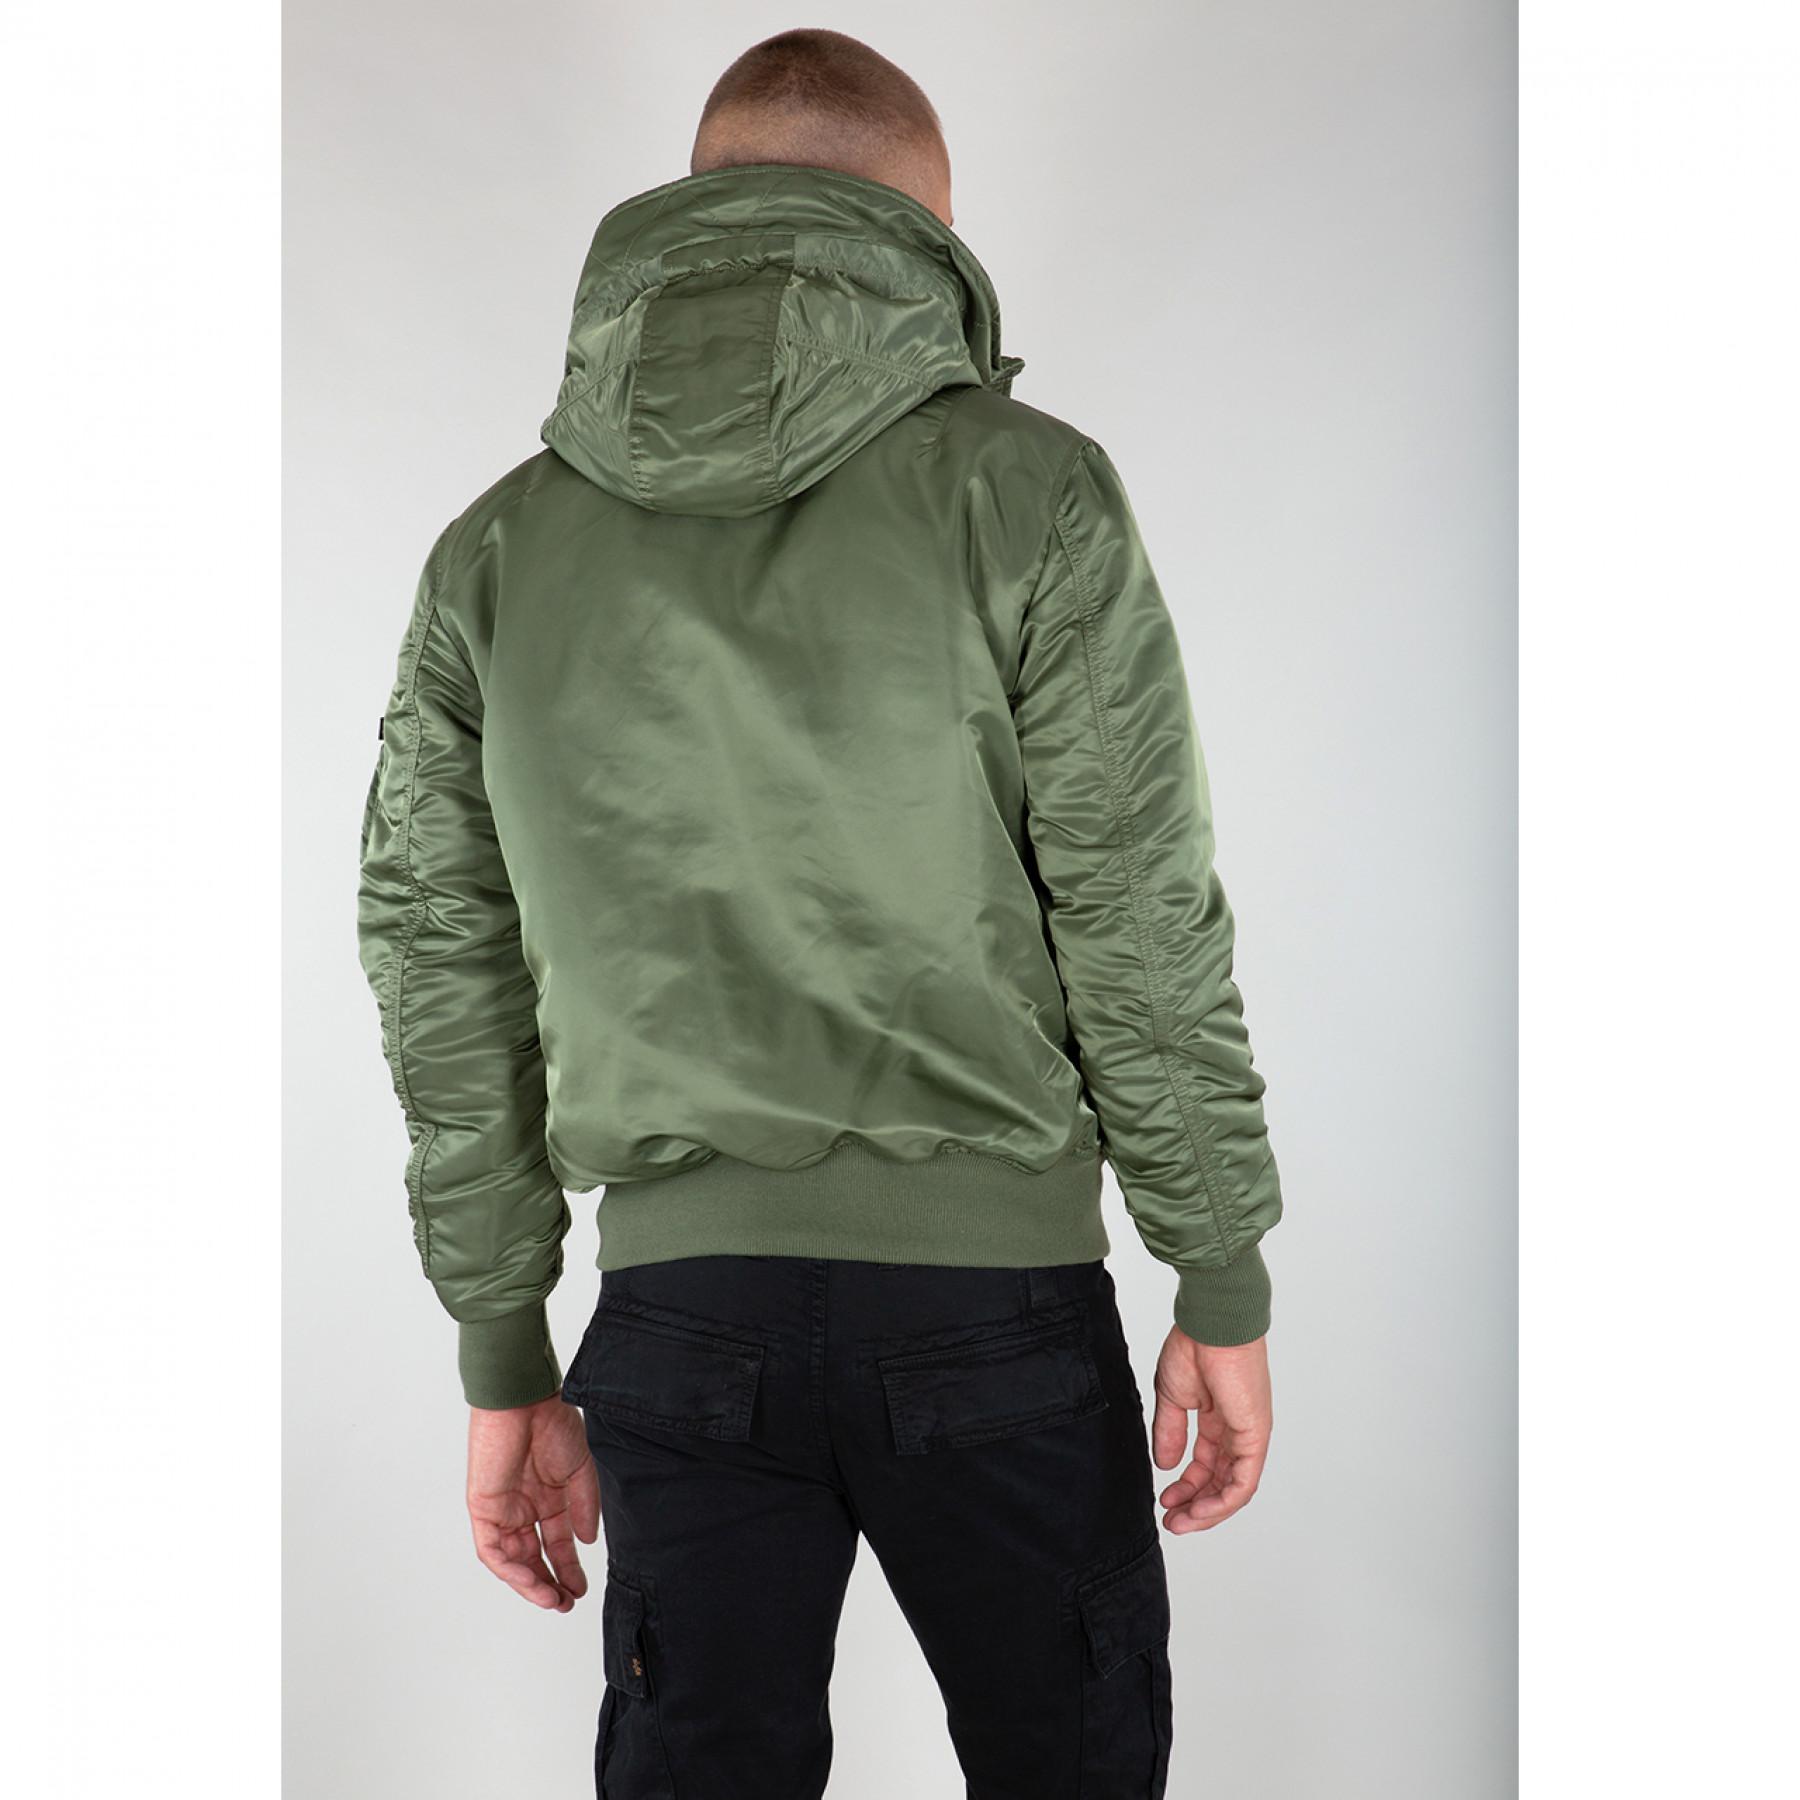 Hooded bomber Alpha Industries MA-1